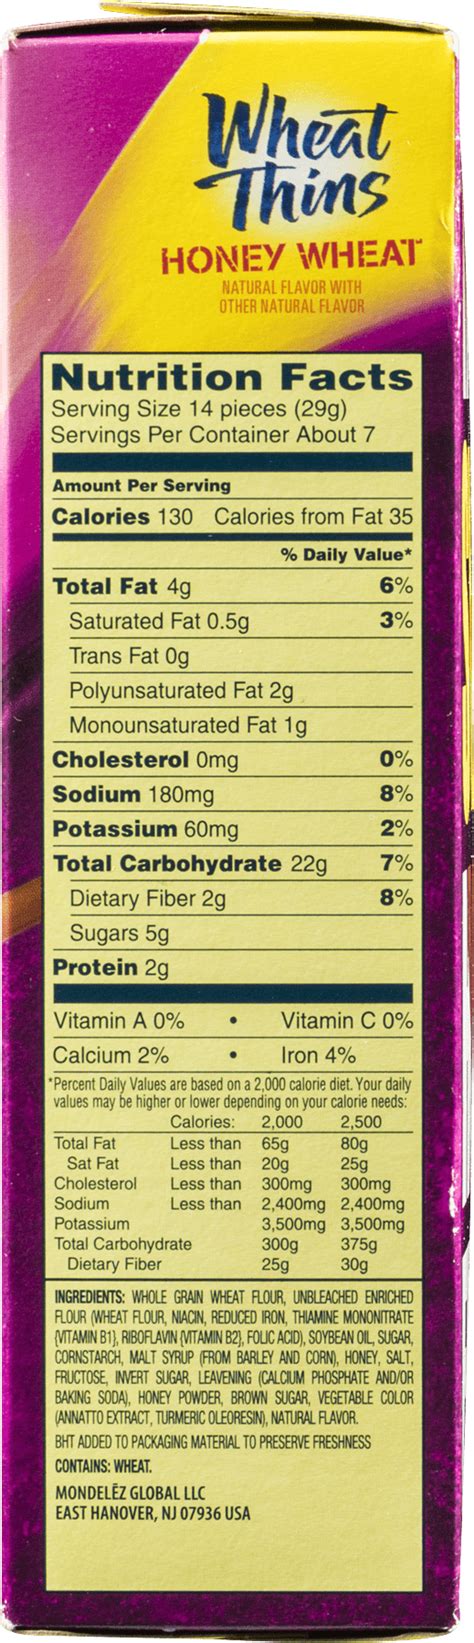 Wheat Thins Nutrition Facts Besto Blog